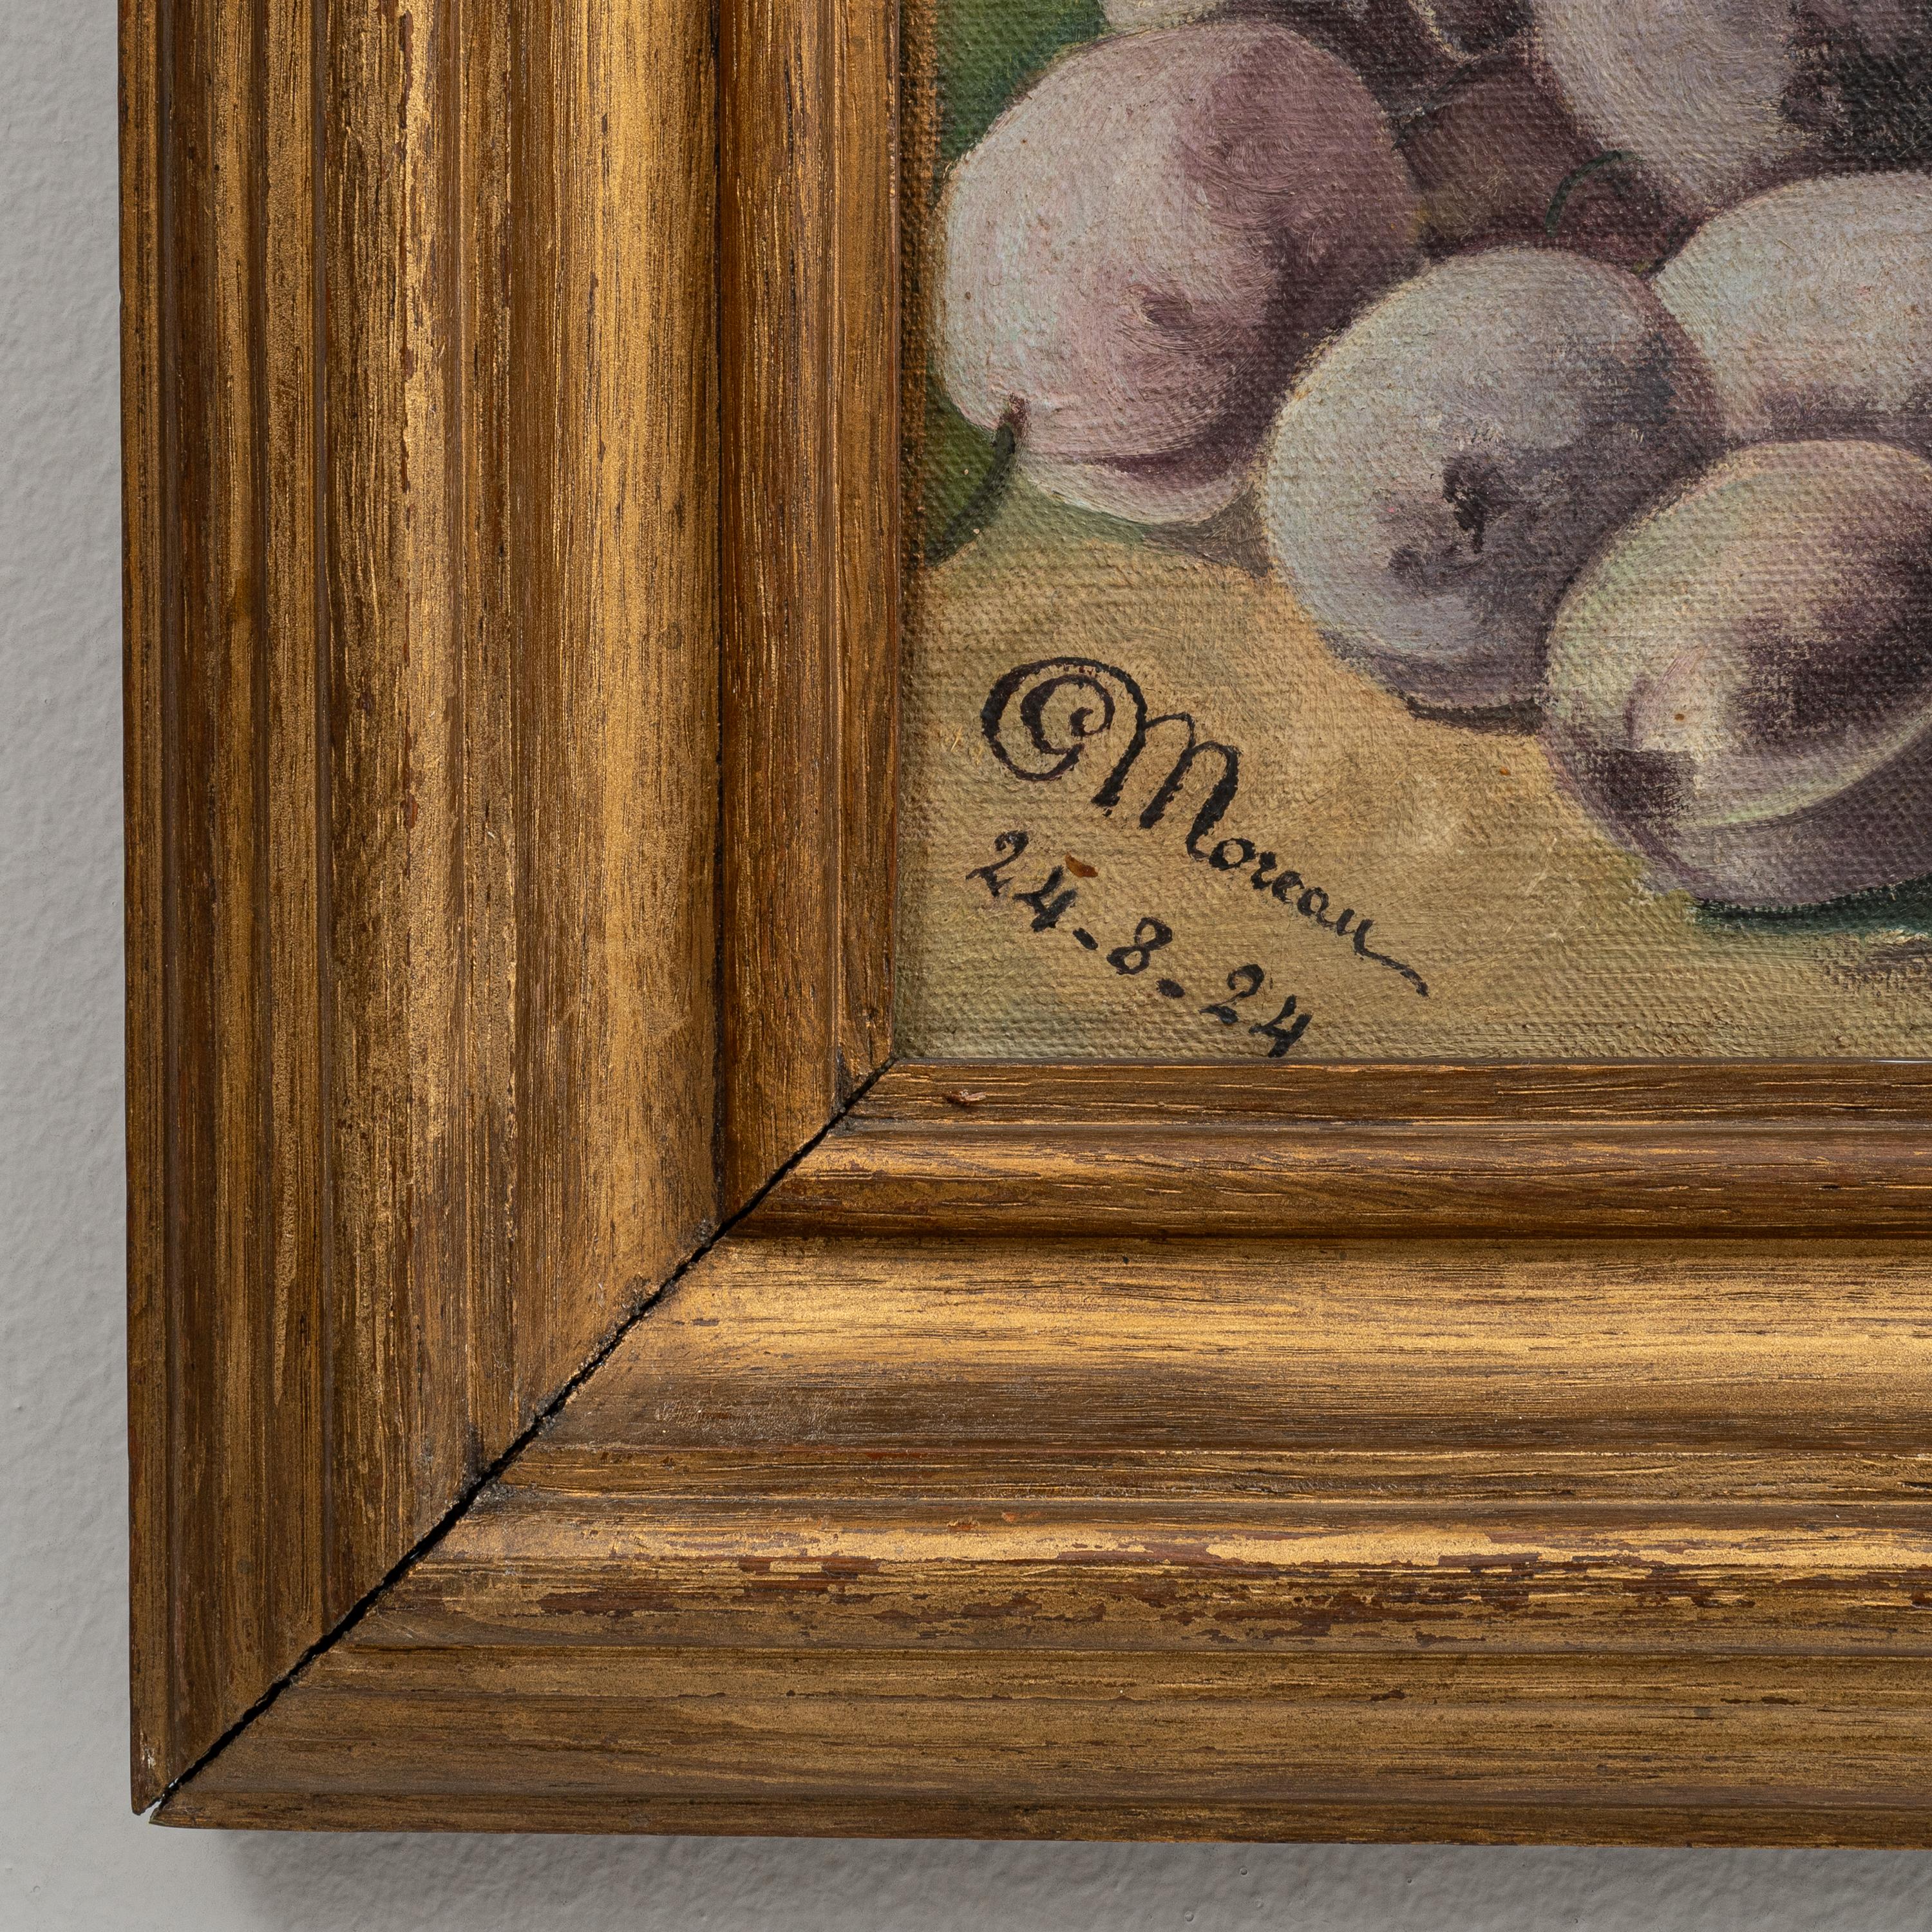 Immerse yourself in the rustic warmth of this charming 20th-century Belgian painting, a delightful still life that brings the simplicity and beauty of the countryside into your home. This artwork features a tastefully arranged composition of plump,